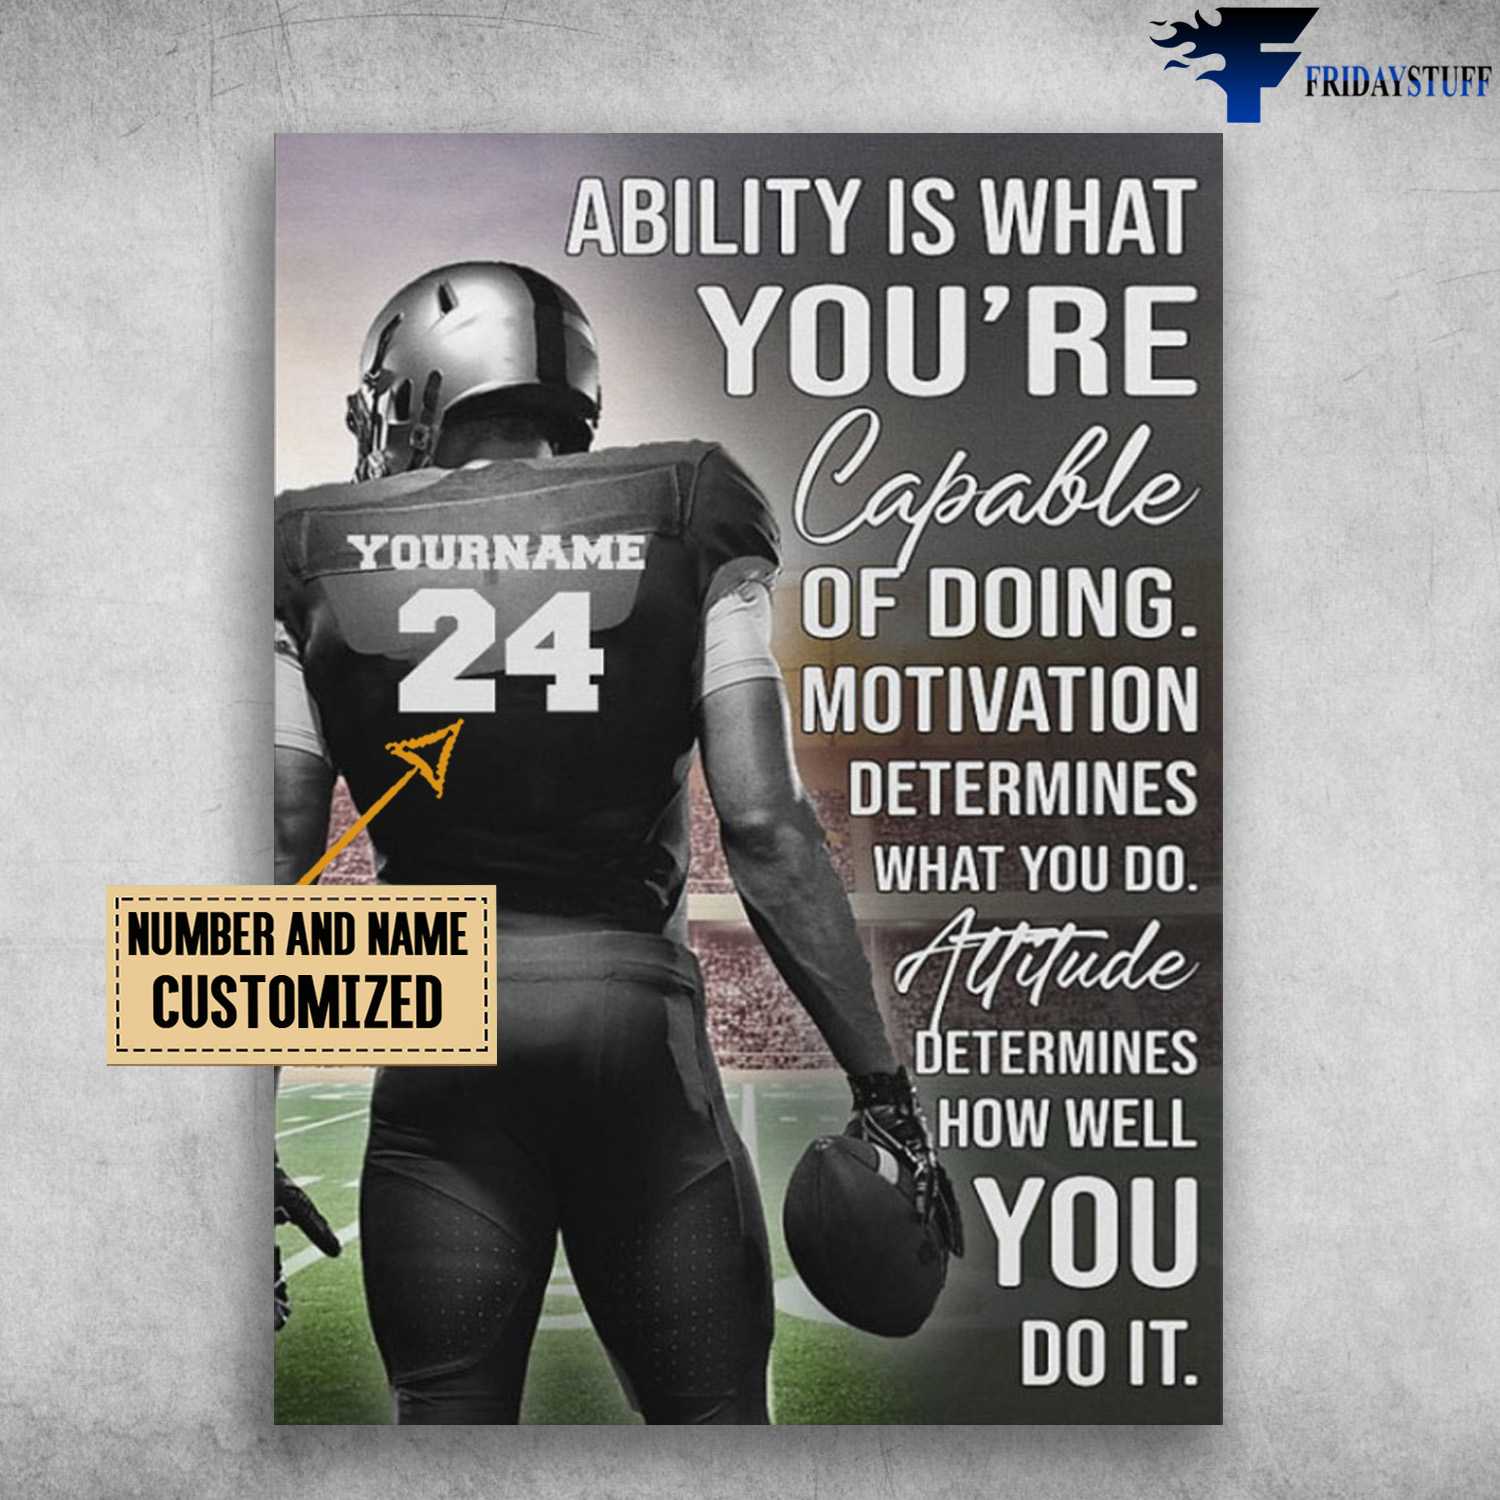 American Football, Football Poster, Ability Is What You're Capable Of Doing, Motivation Determines, What You Do, Attitude Determines, How Well You Do It